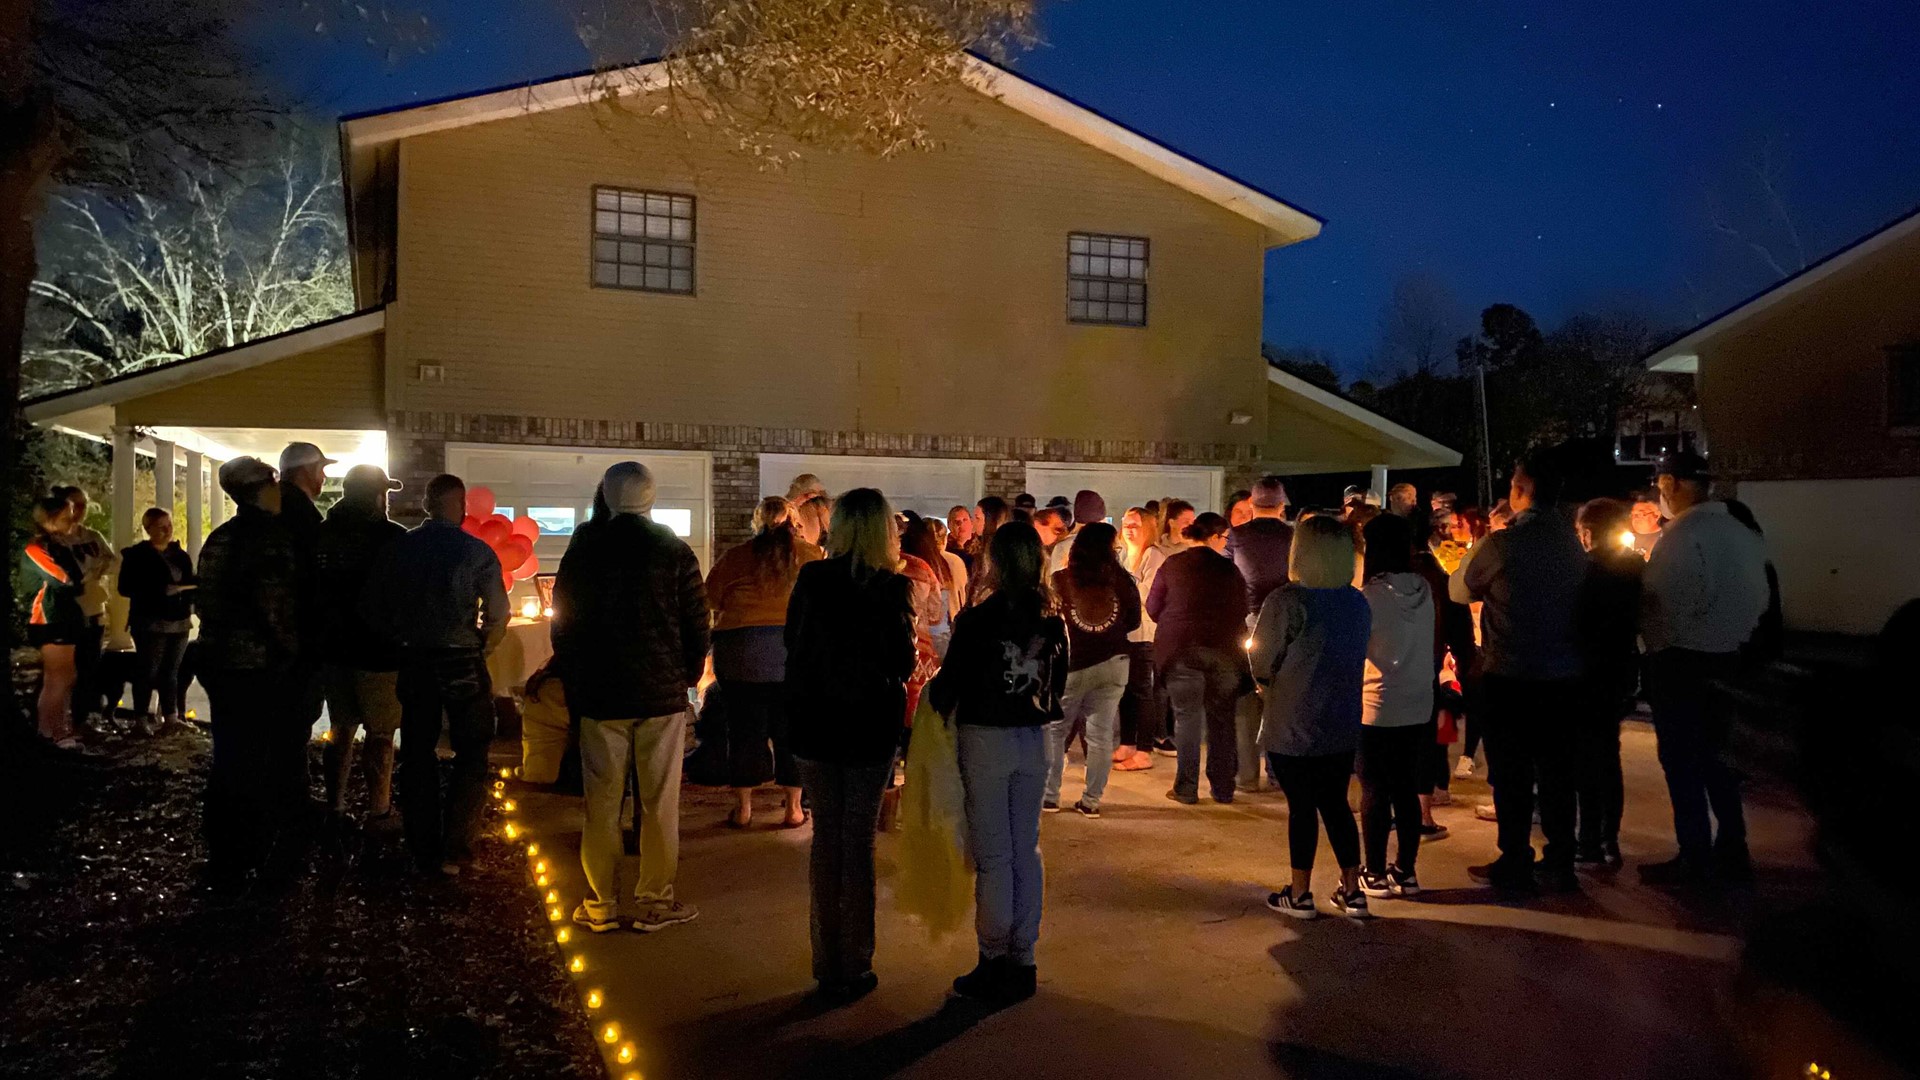 On Sunday night, dozens of family and friends came together to remember Jeana Norton and show support for her family through donations and a candlelight vigil.